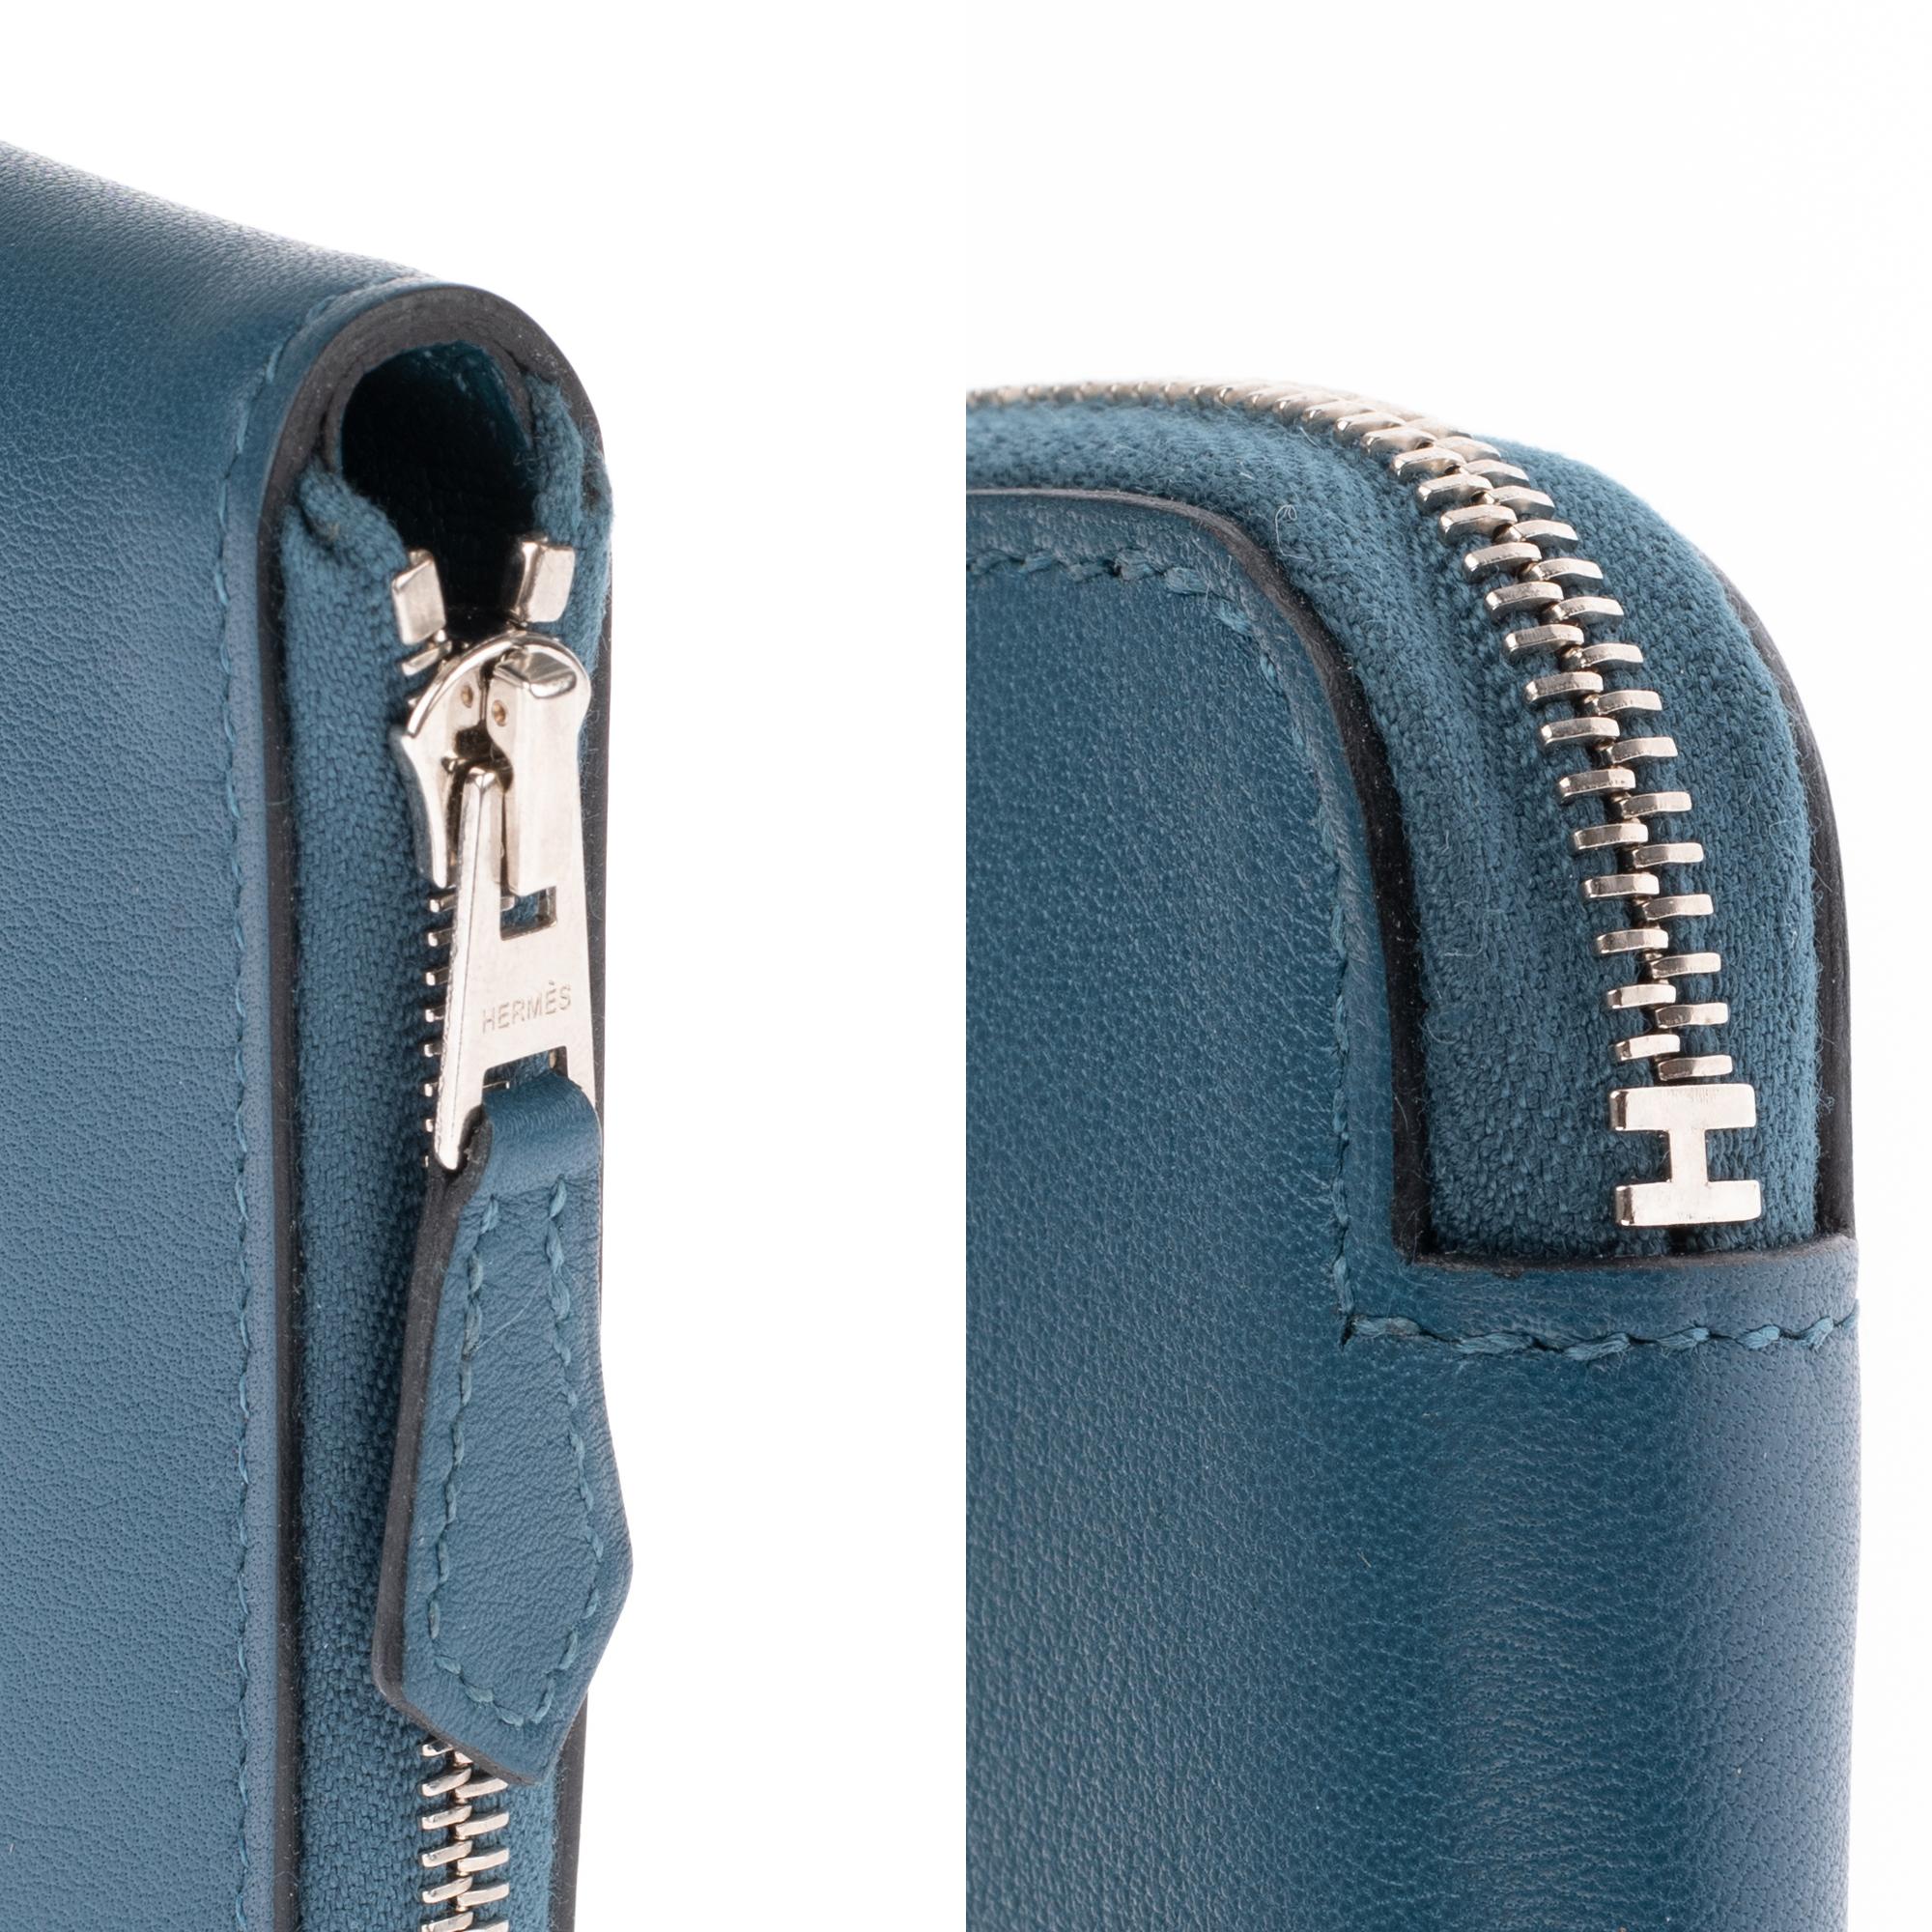 Brand New - Hermès Azap Wallet in smooth blue leather with silver hardware ! 5